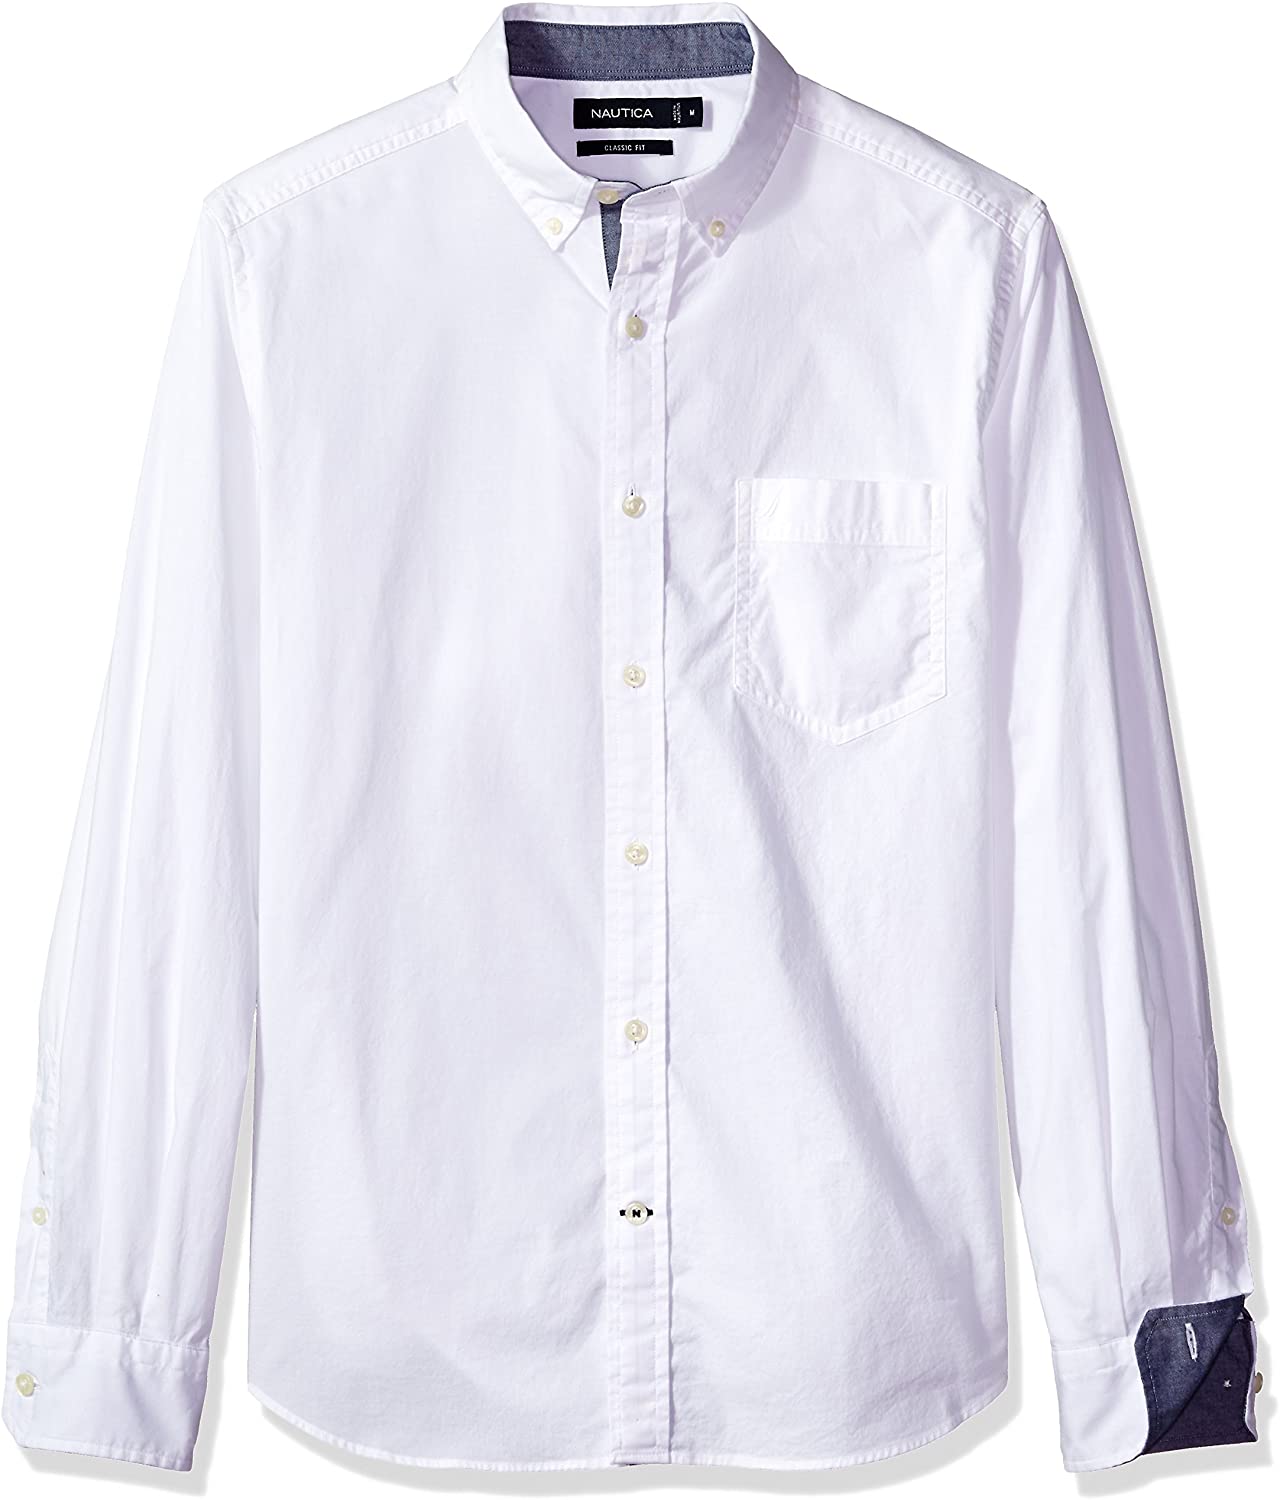 Nautica Men's Classic Fit Stretch Solid Long Sleeve Button Down Shirt | eBay